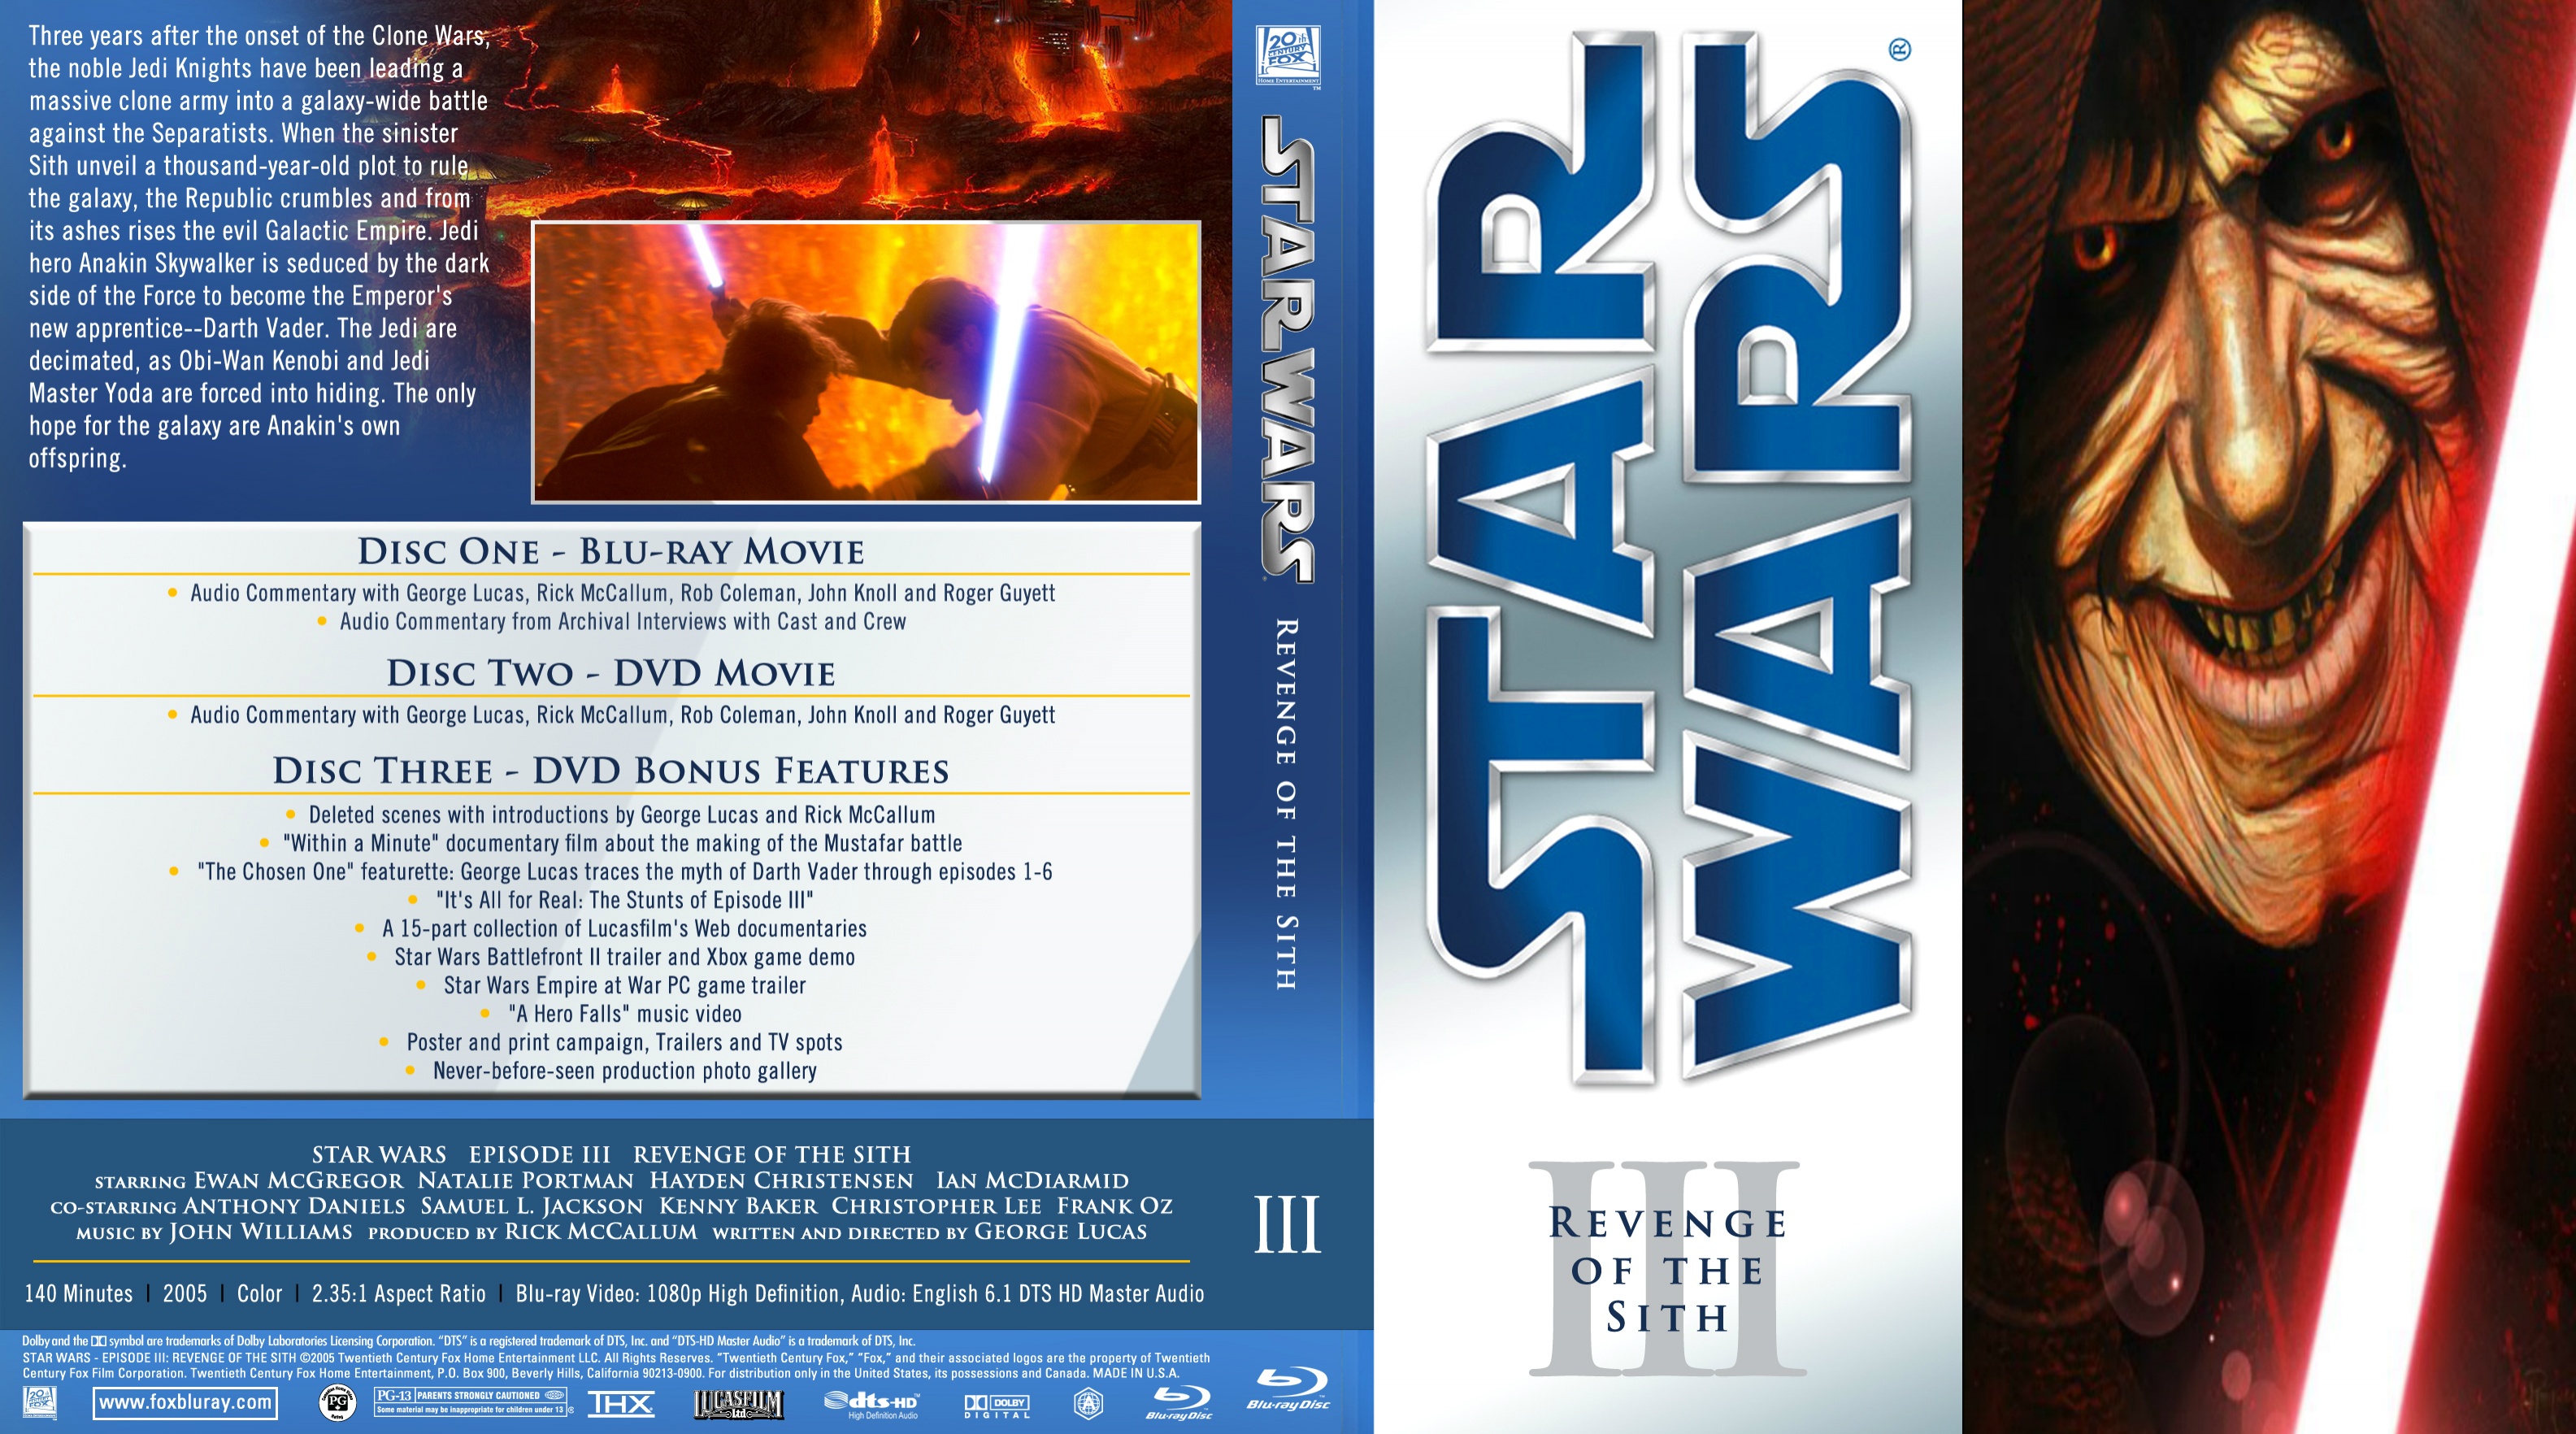 Star Wars III: Revenge of the Sith box cover